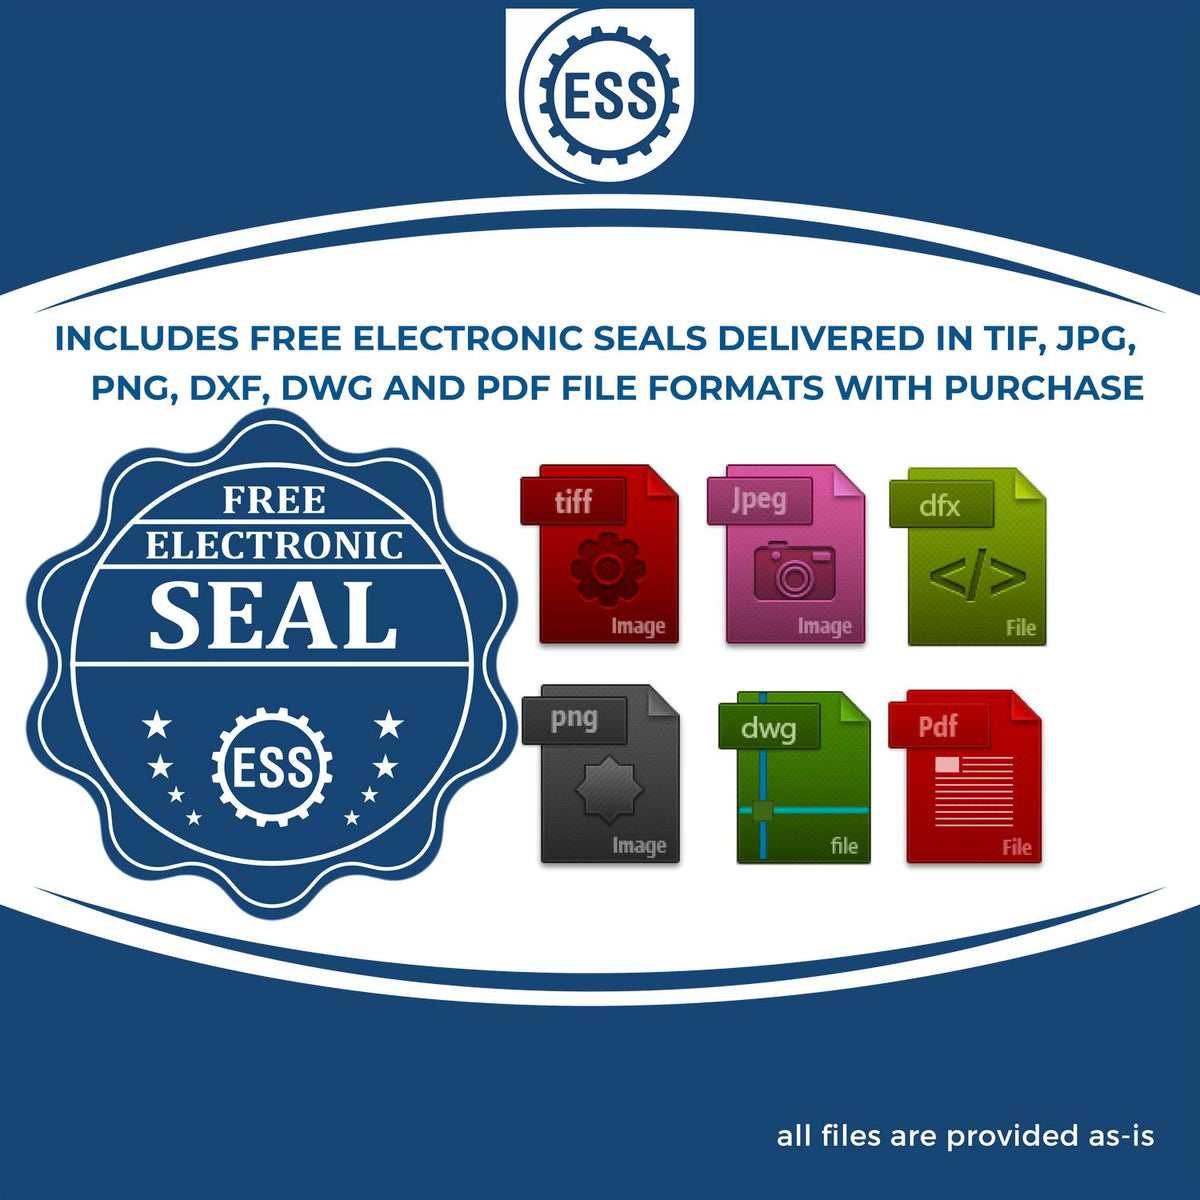 An infographic for the free electronic seal for the PSI Wyoming Notary Stamp illustrating the different file type icons such as DXF, DWG, TIF, JPG and PNG.